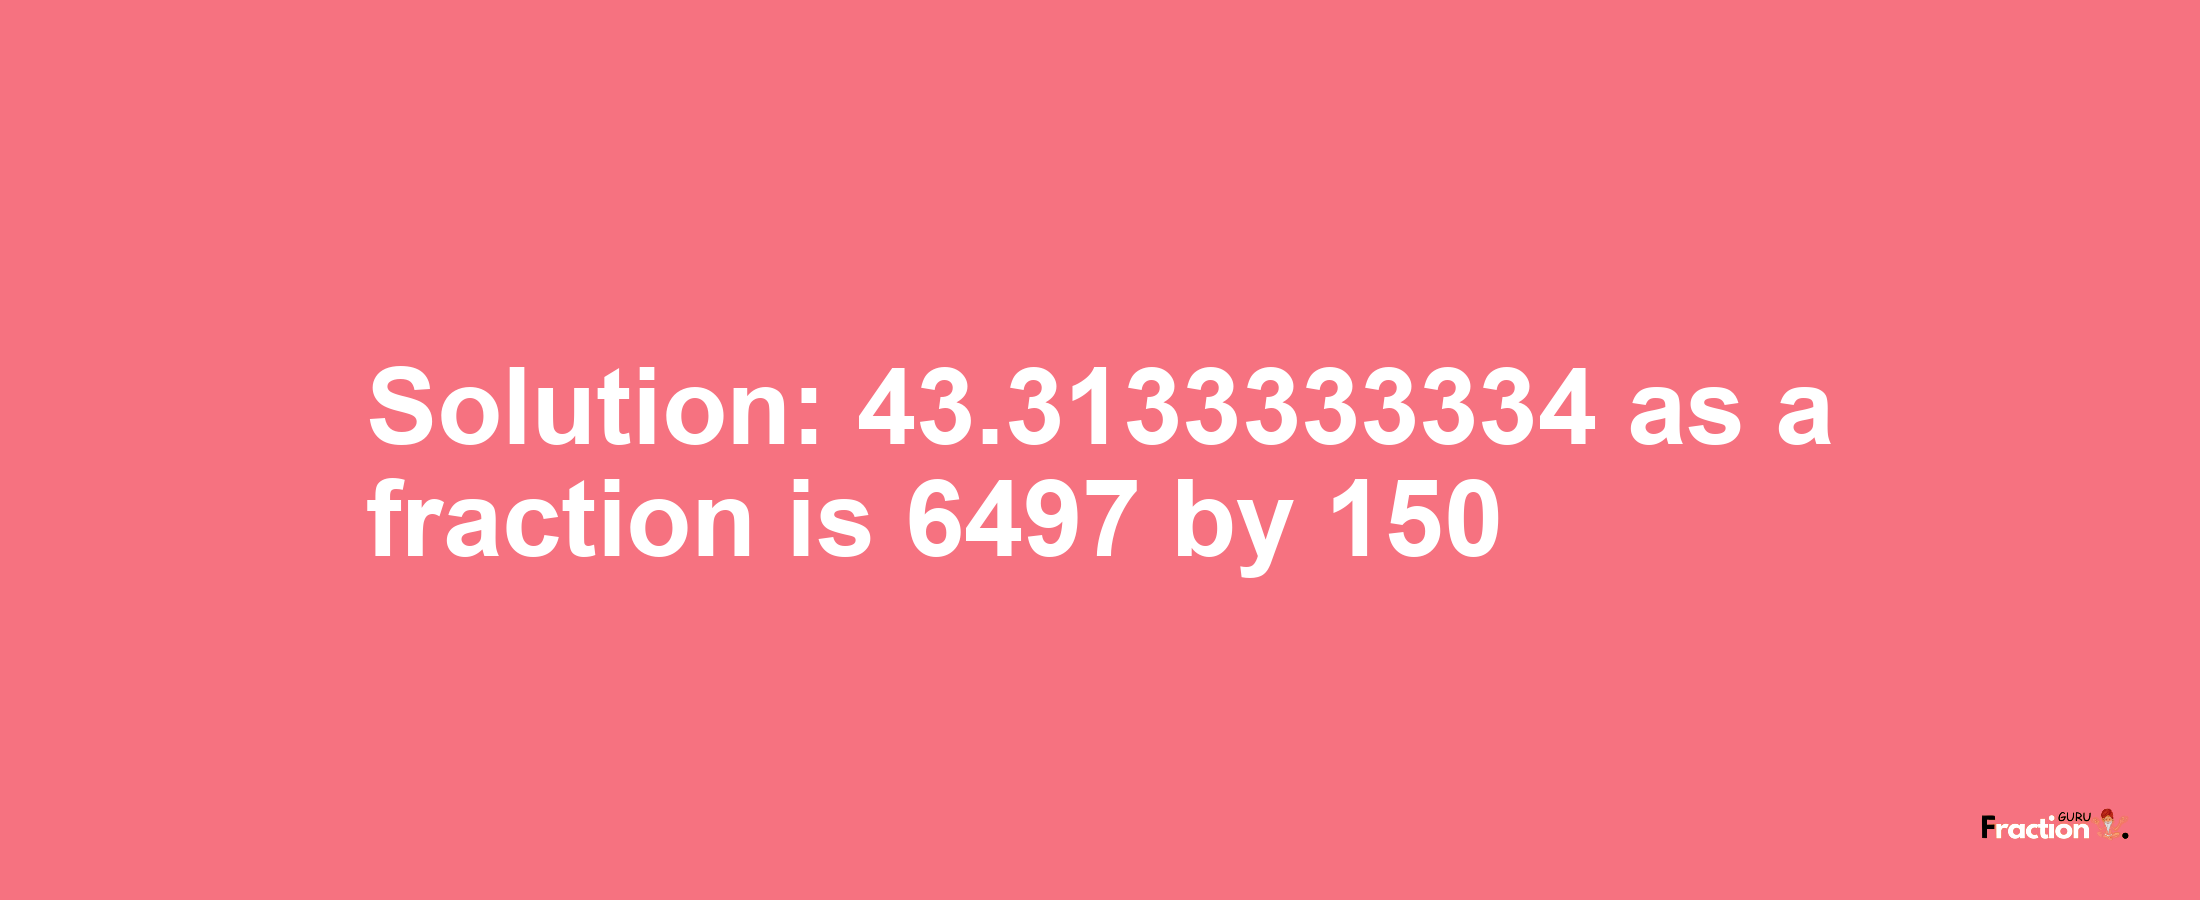 Solution:43.3133333334 as a fraction is 6497/150